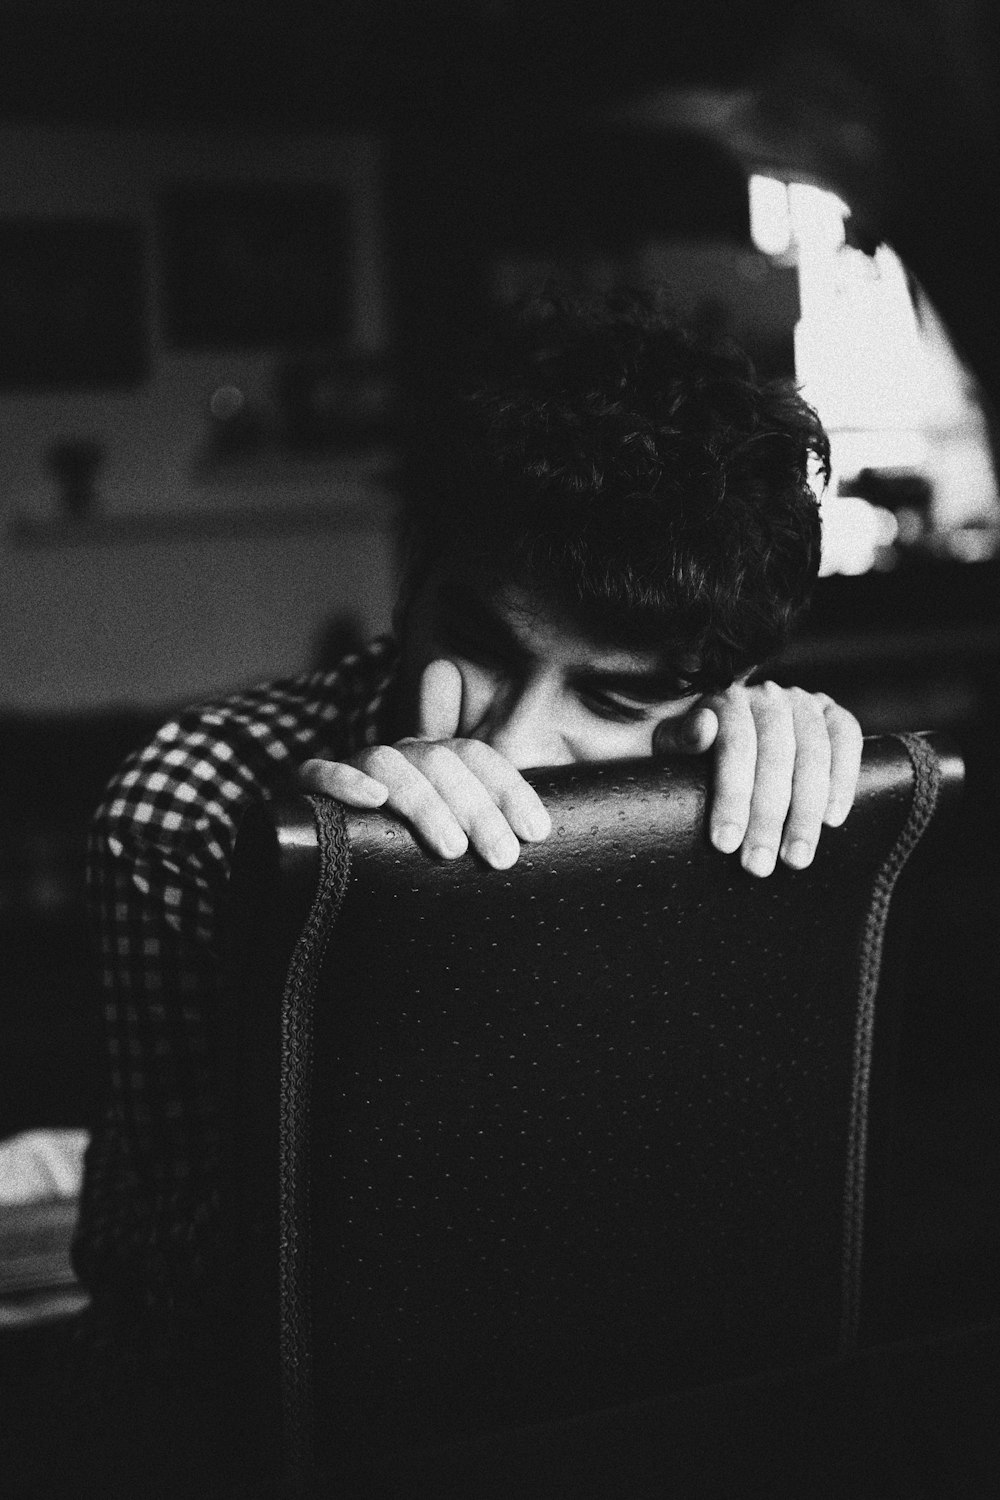 500+ Sad Boy Pictures [HD] | Download Free Images & Stock Photos on Unsplash